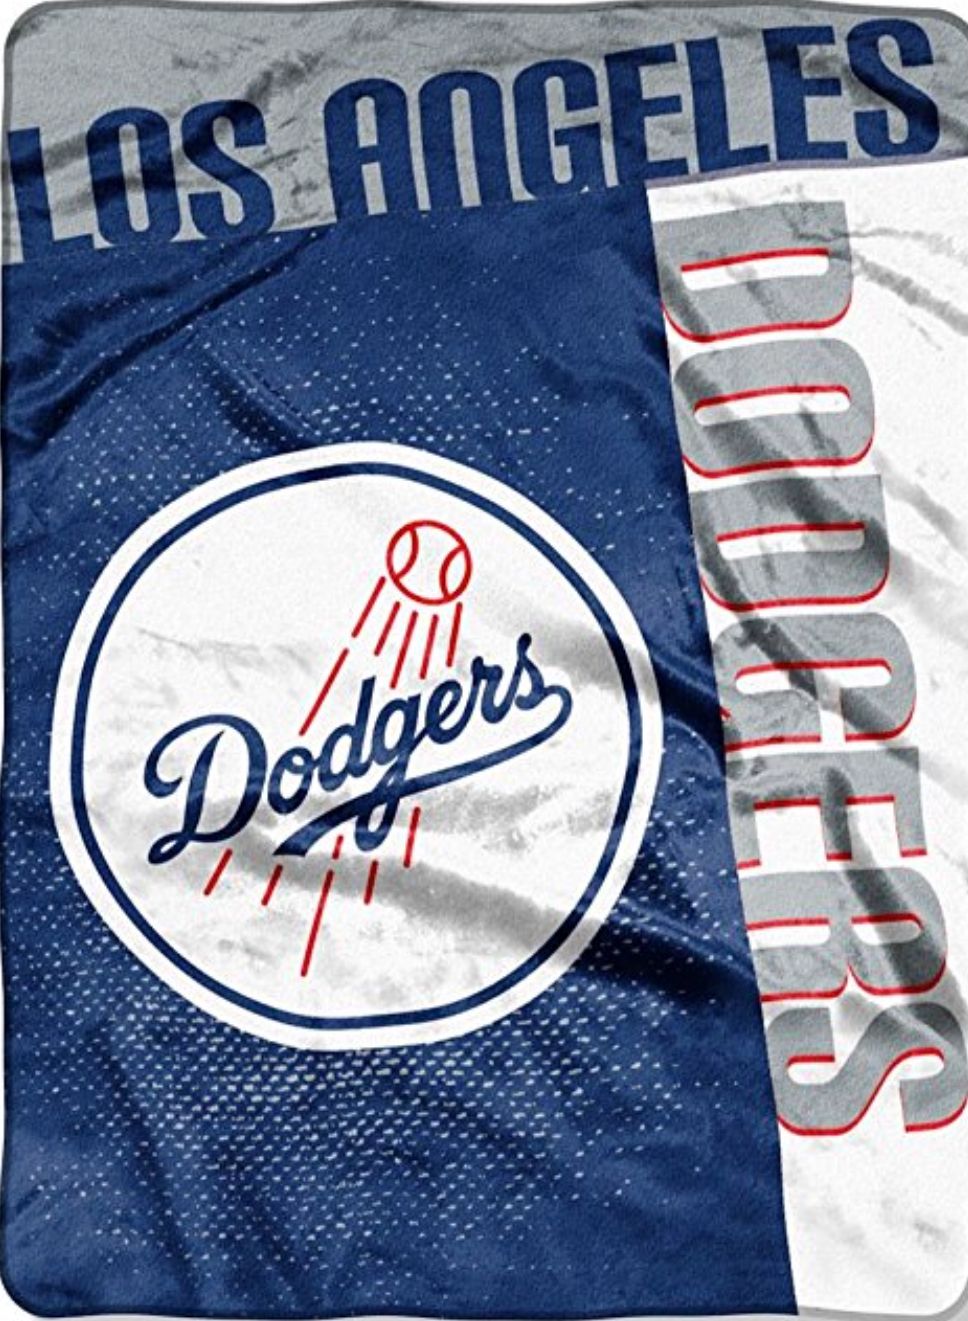 LA Dodgers Plush Throw Blanket, Twin Size, Measures 60 by 80 inches